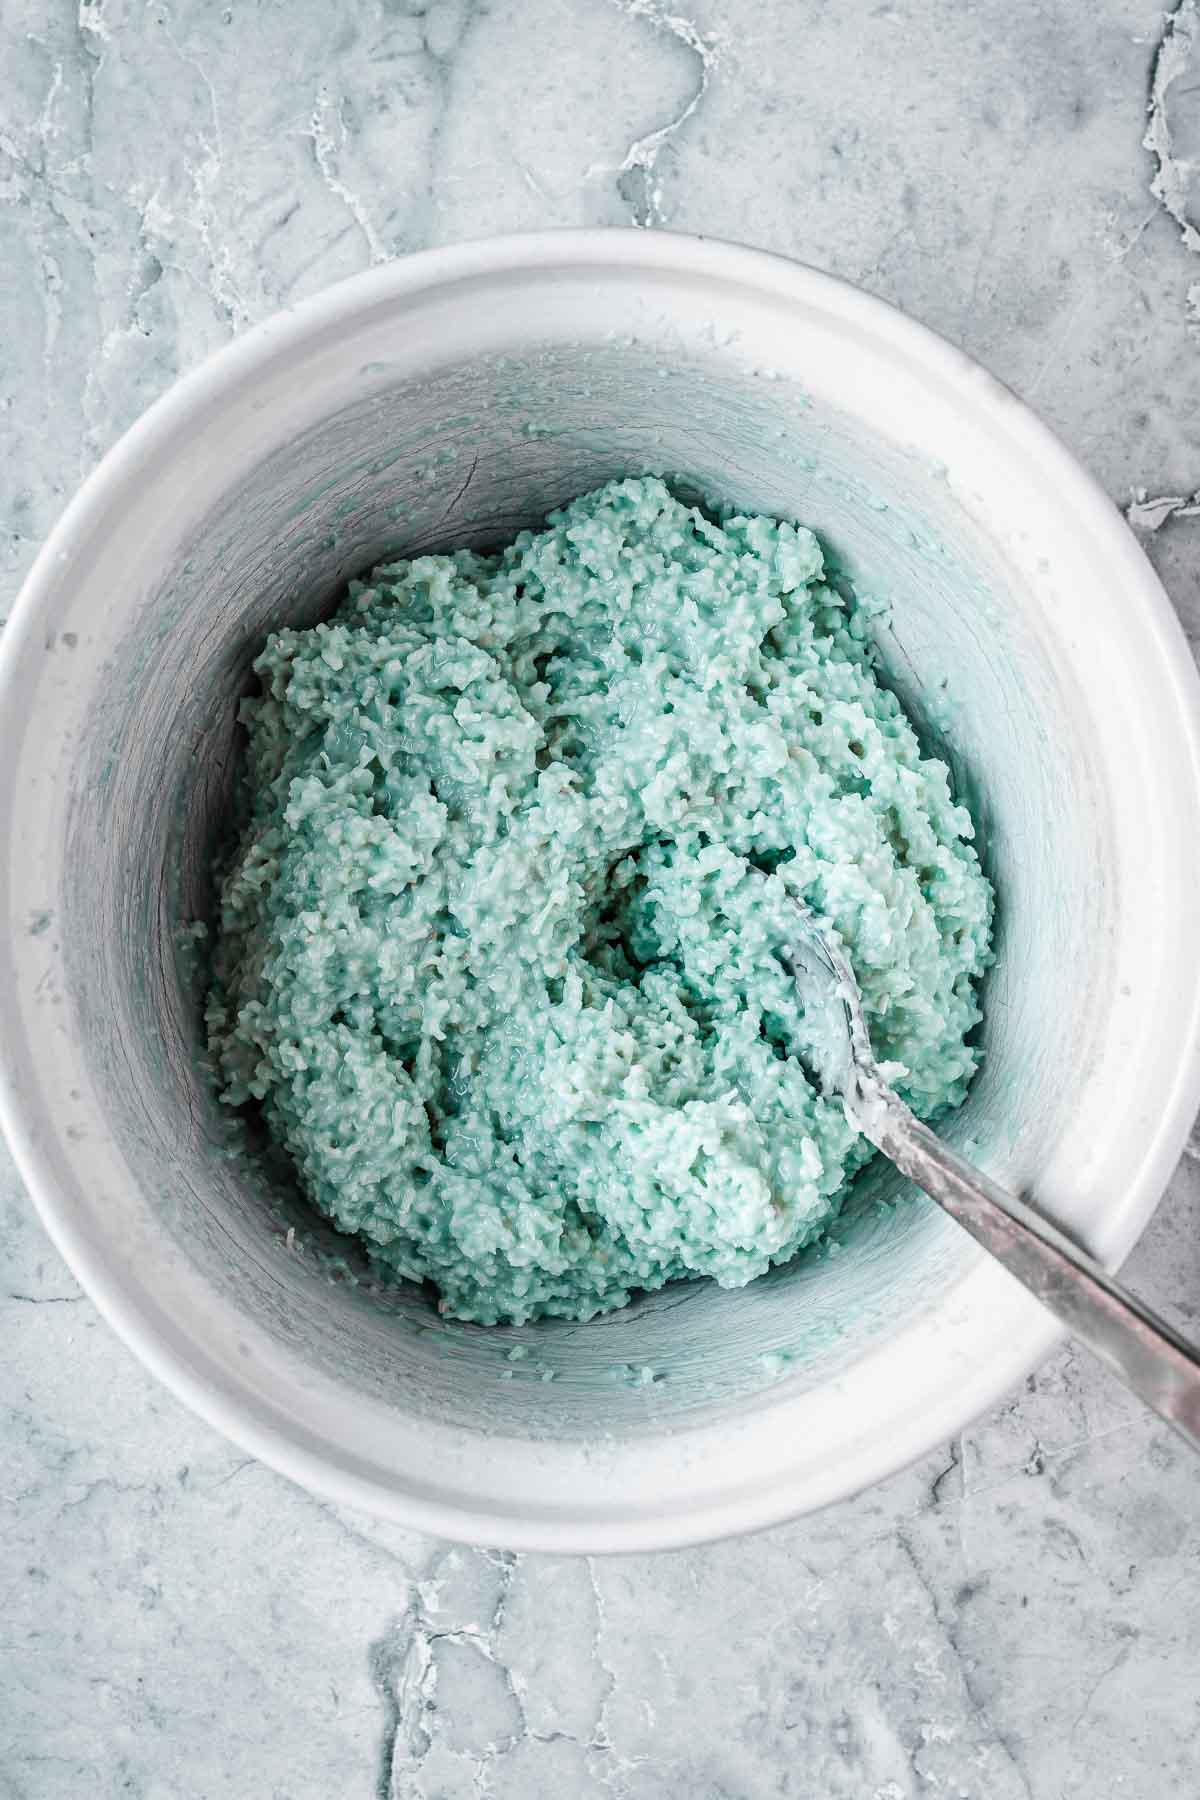 Blue coconut ice after being mixed with food coloring.